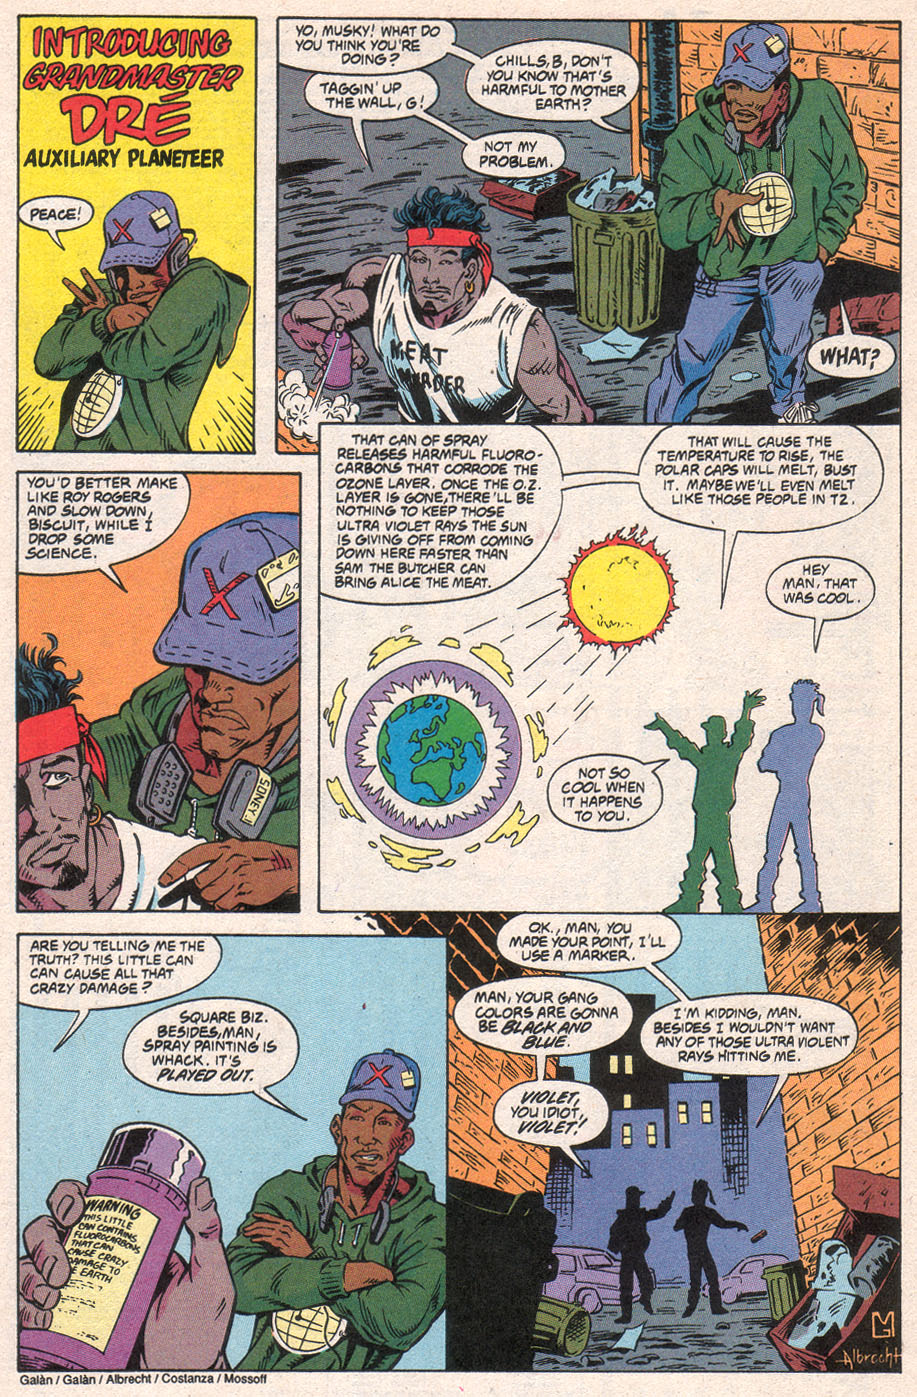 Captain Planet and the Planeteers 10 Page 31